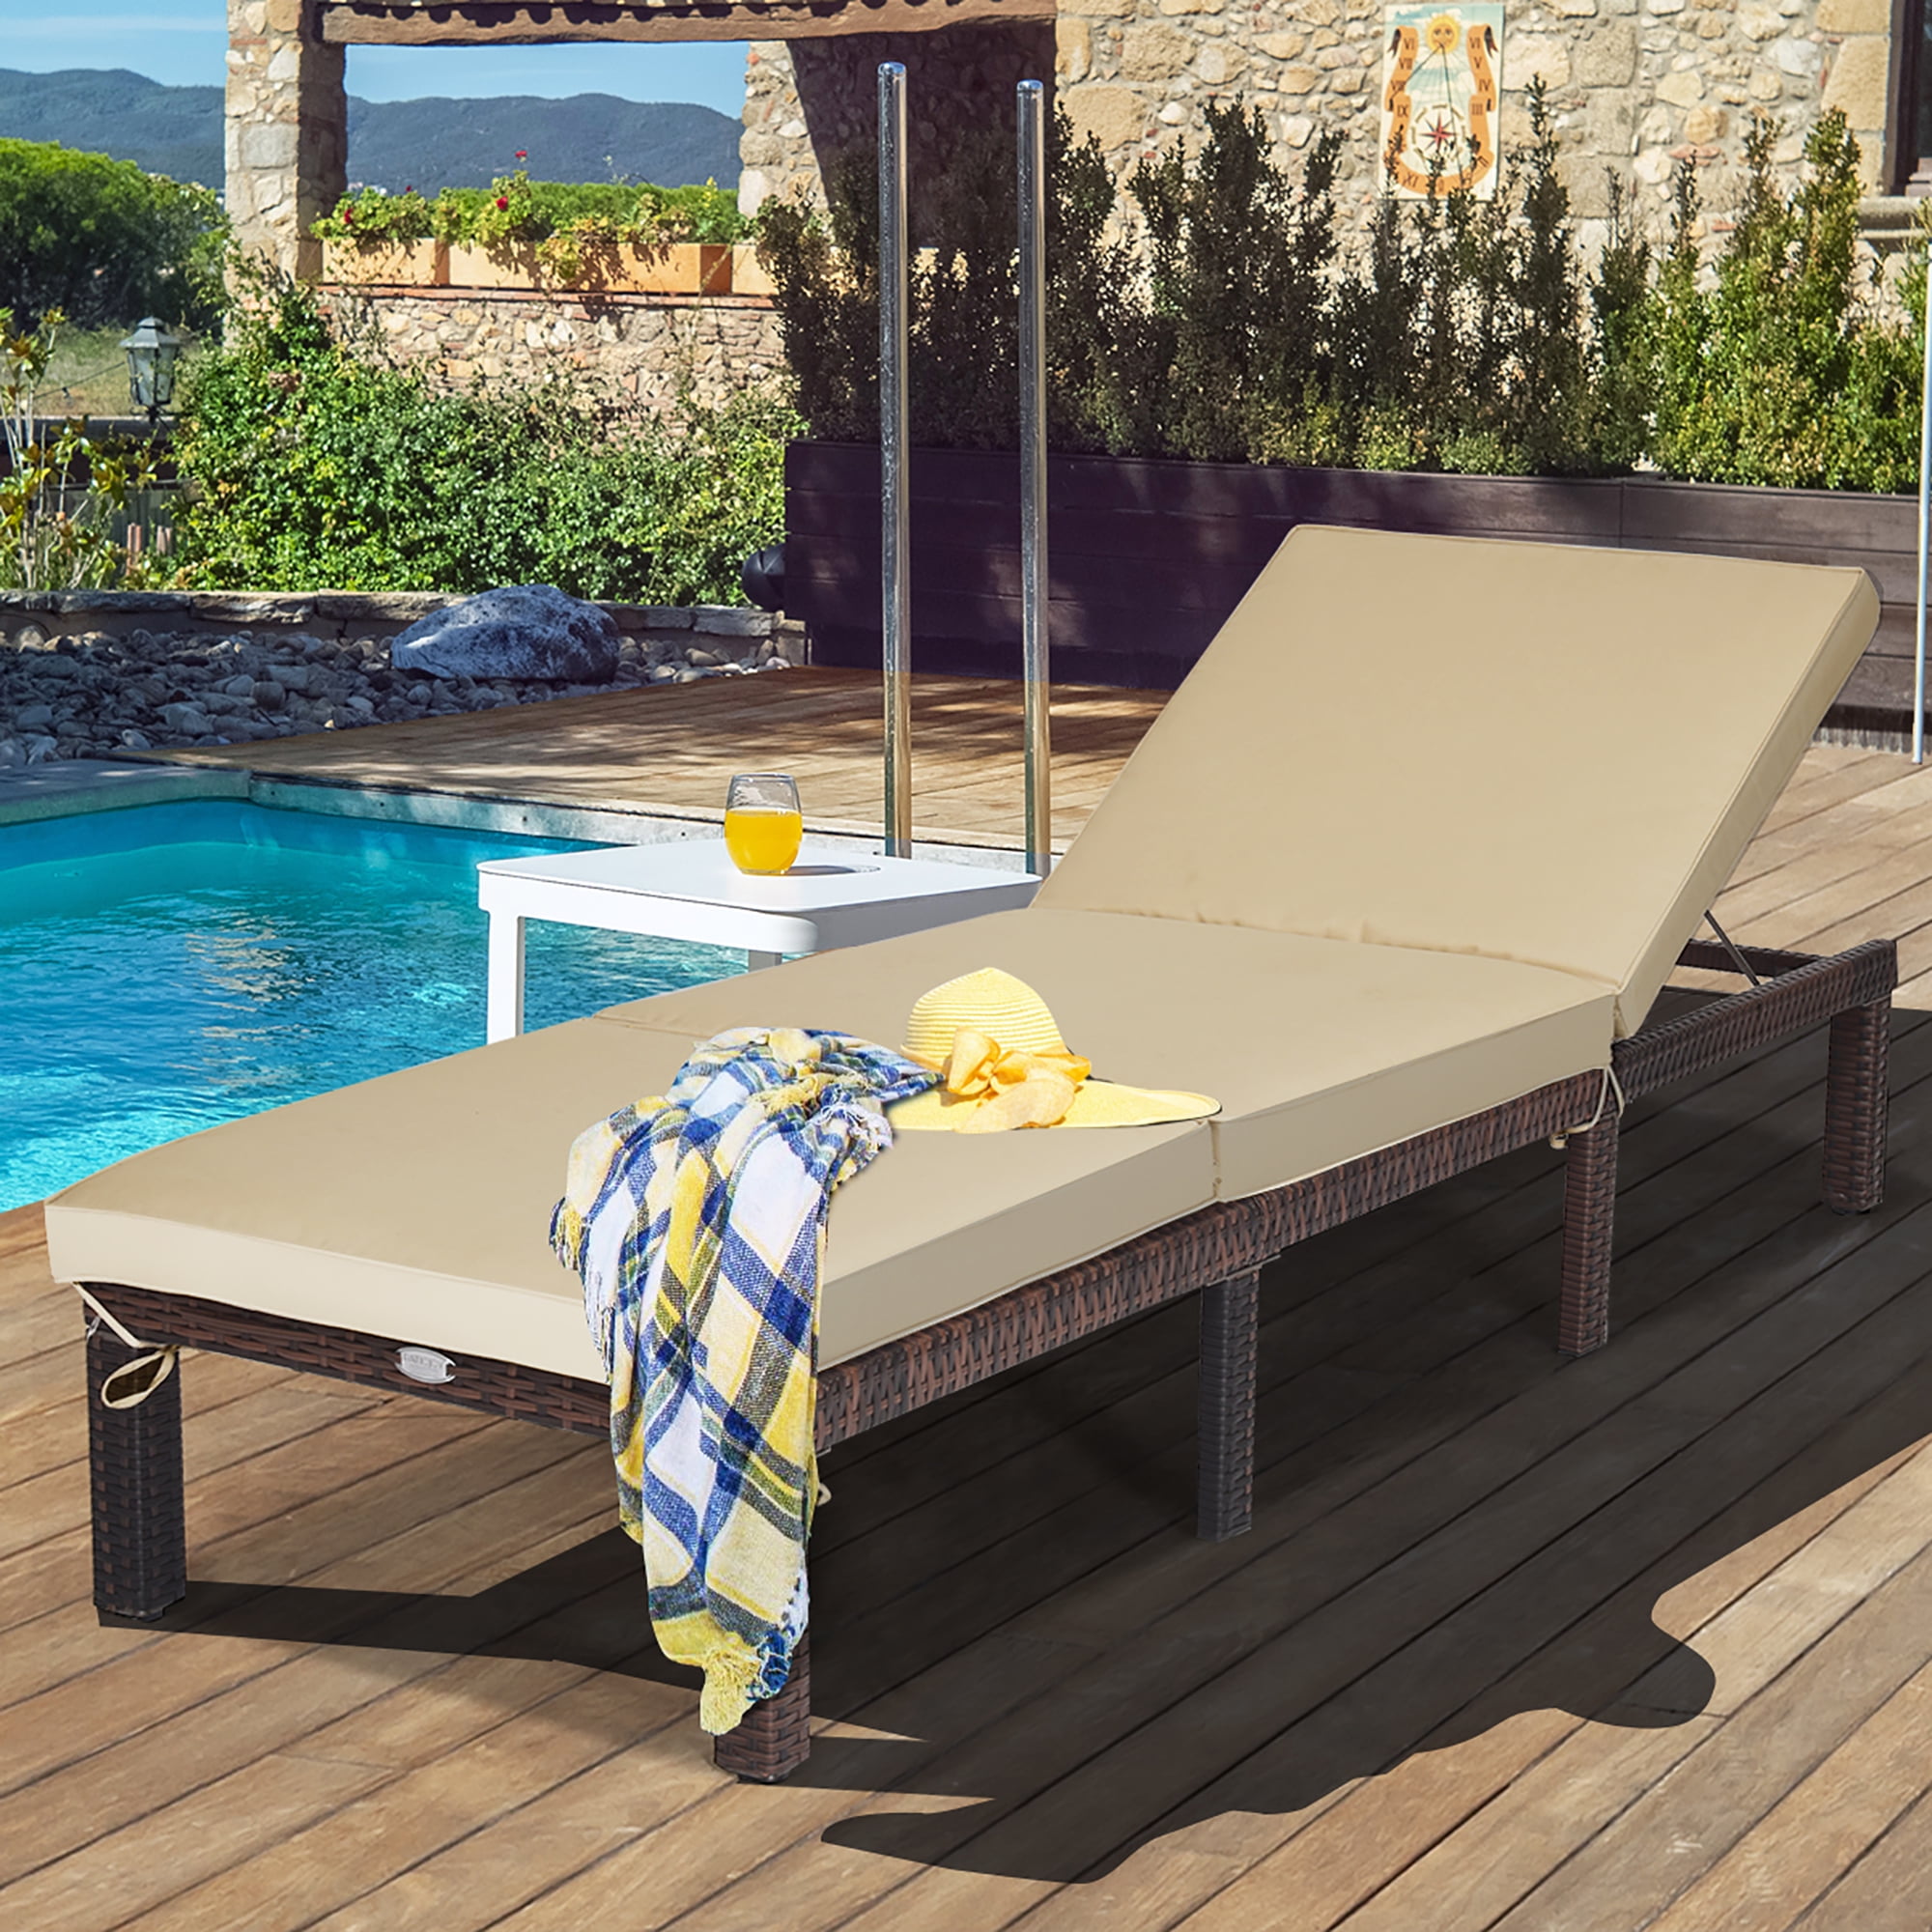 Details about   Rattan Chair Patio Chaise Lounge with Cushion Disassembly Bed W/Wheel Brown 